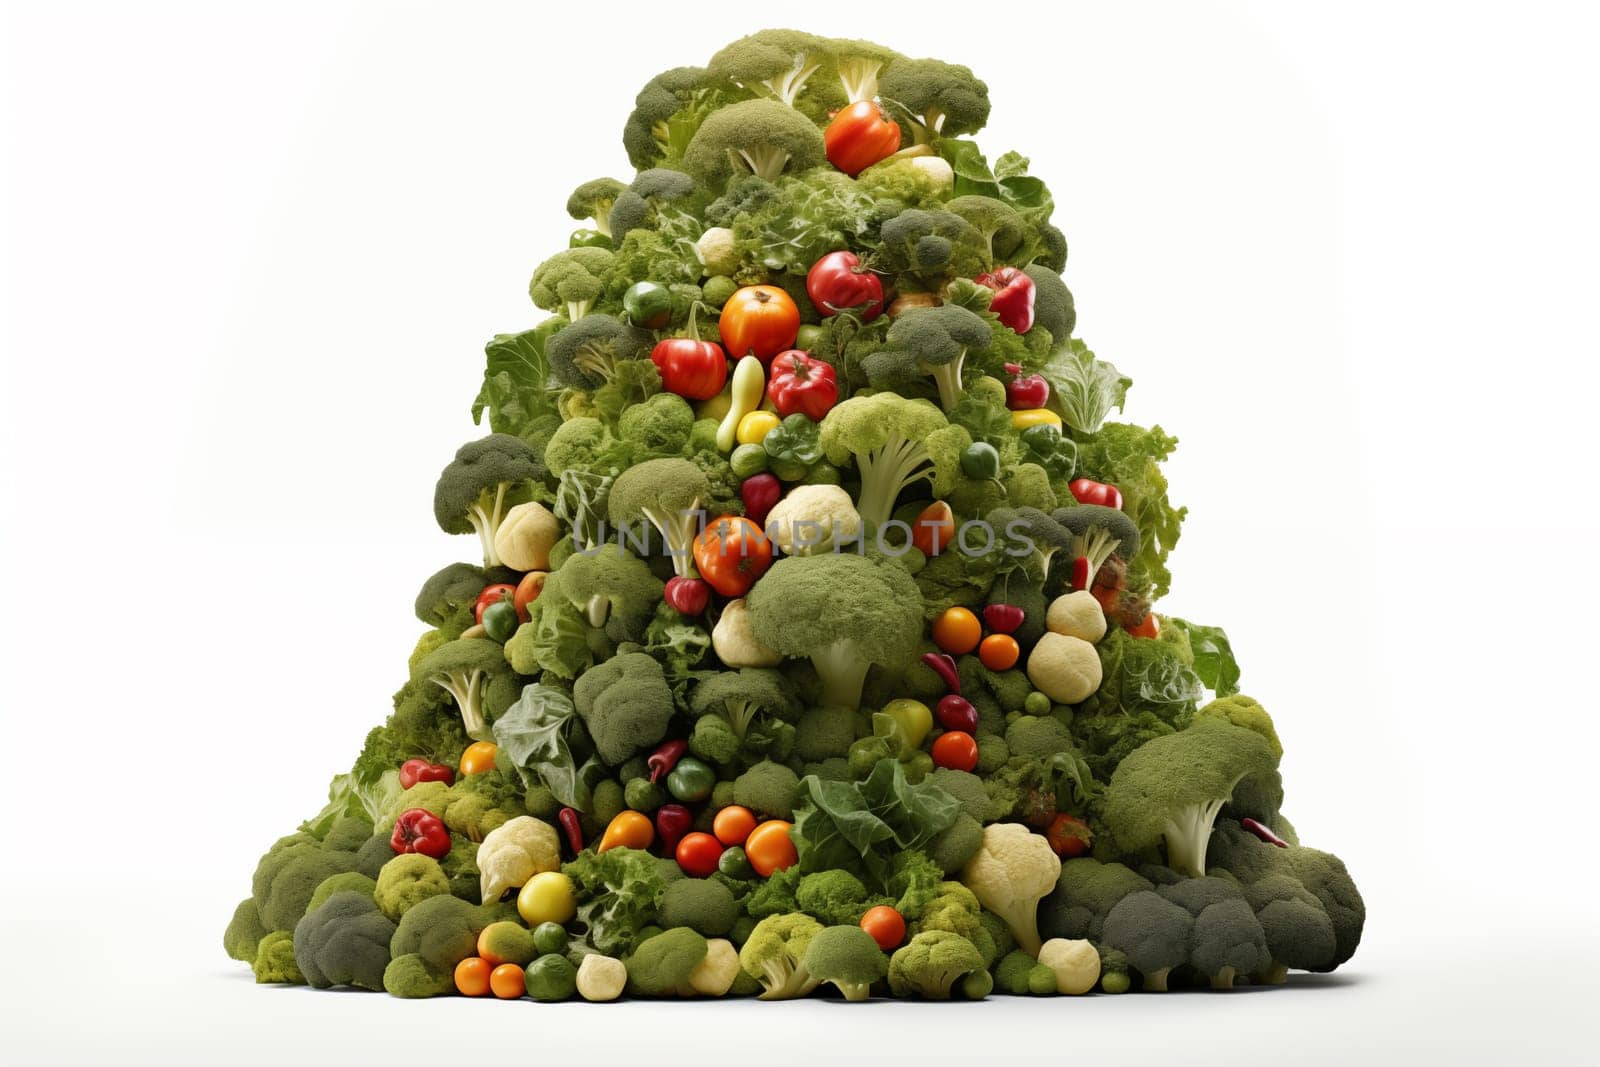 Creative Christmas tree made of vegetables in the shape of a pyramid by Zakharova